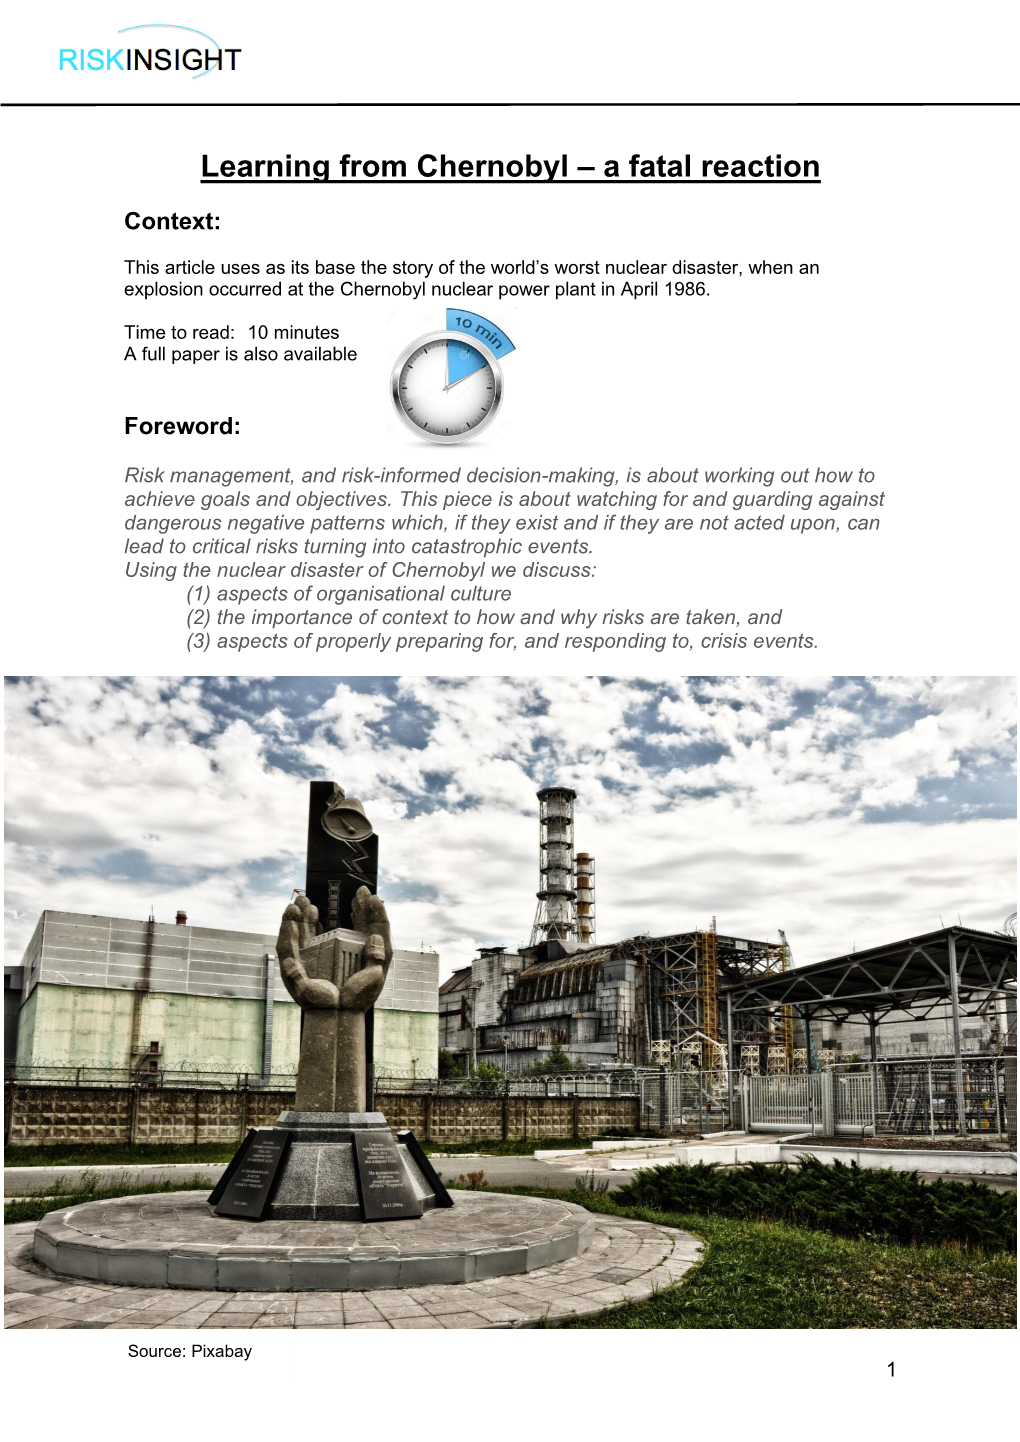 Learning from Chernobyl – a Fatal Reaction